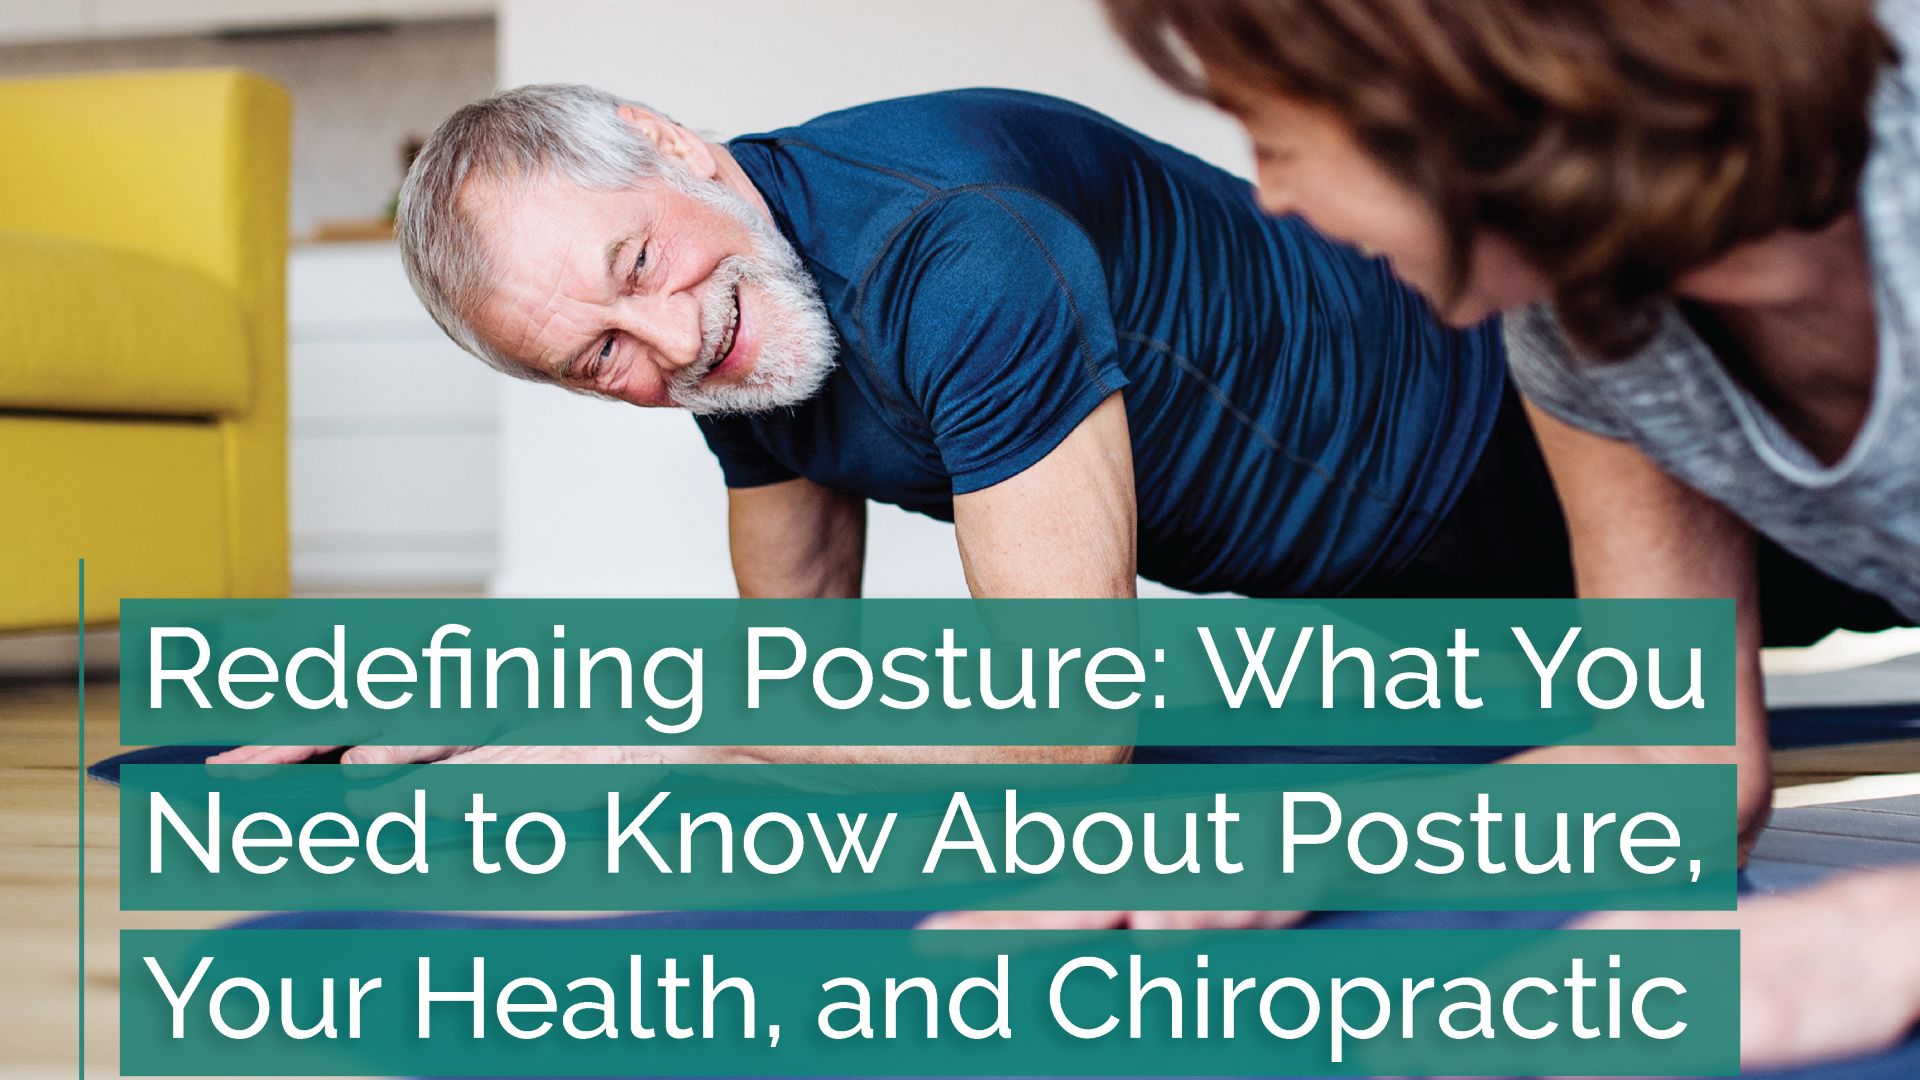 Redefining Posture: What You Need To Know About Posture, Your Health, and Chiropractic